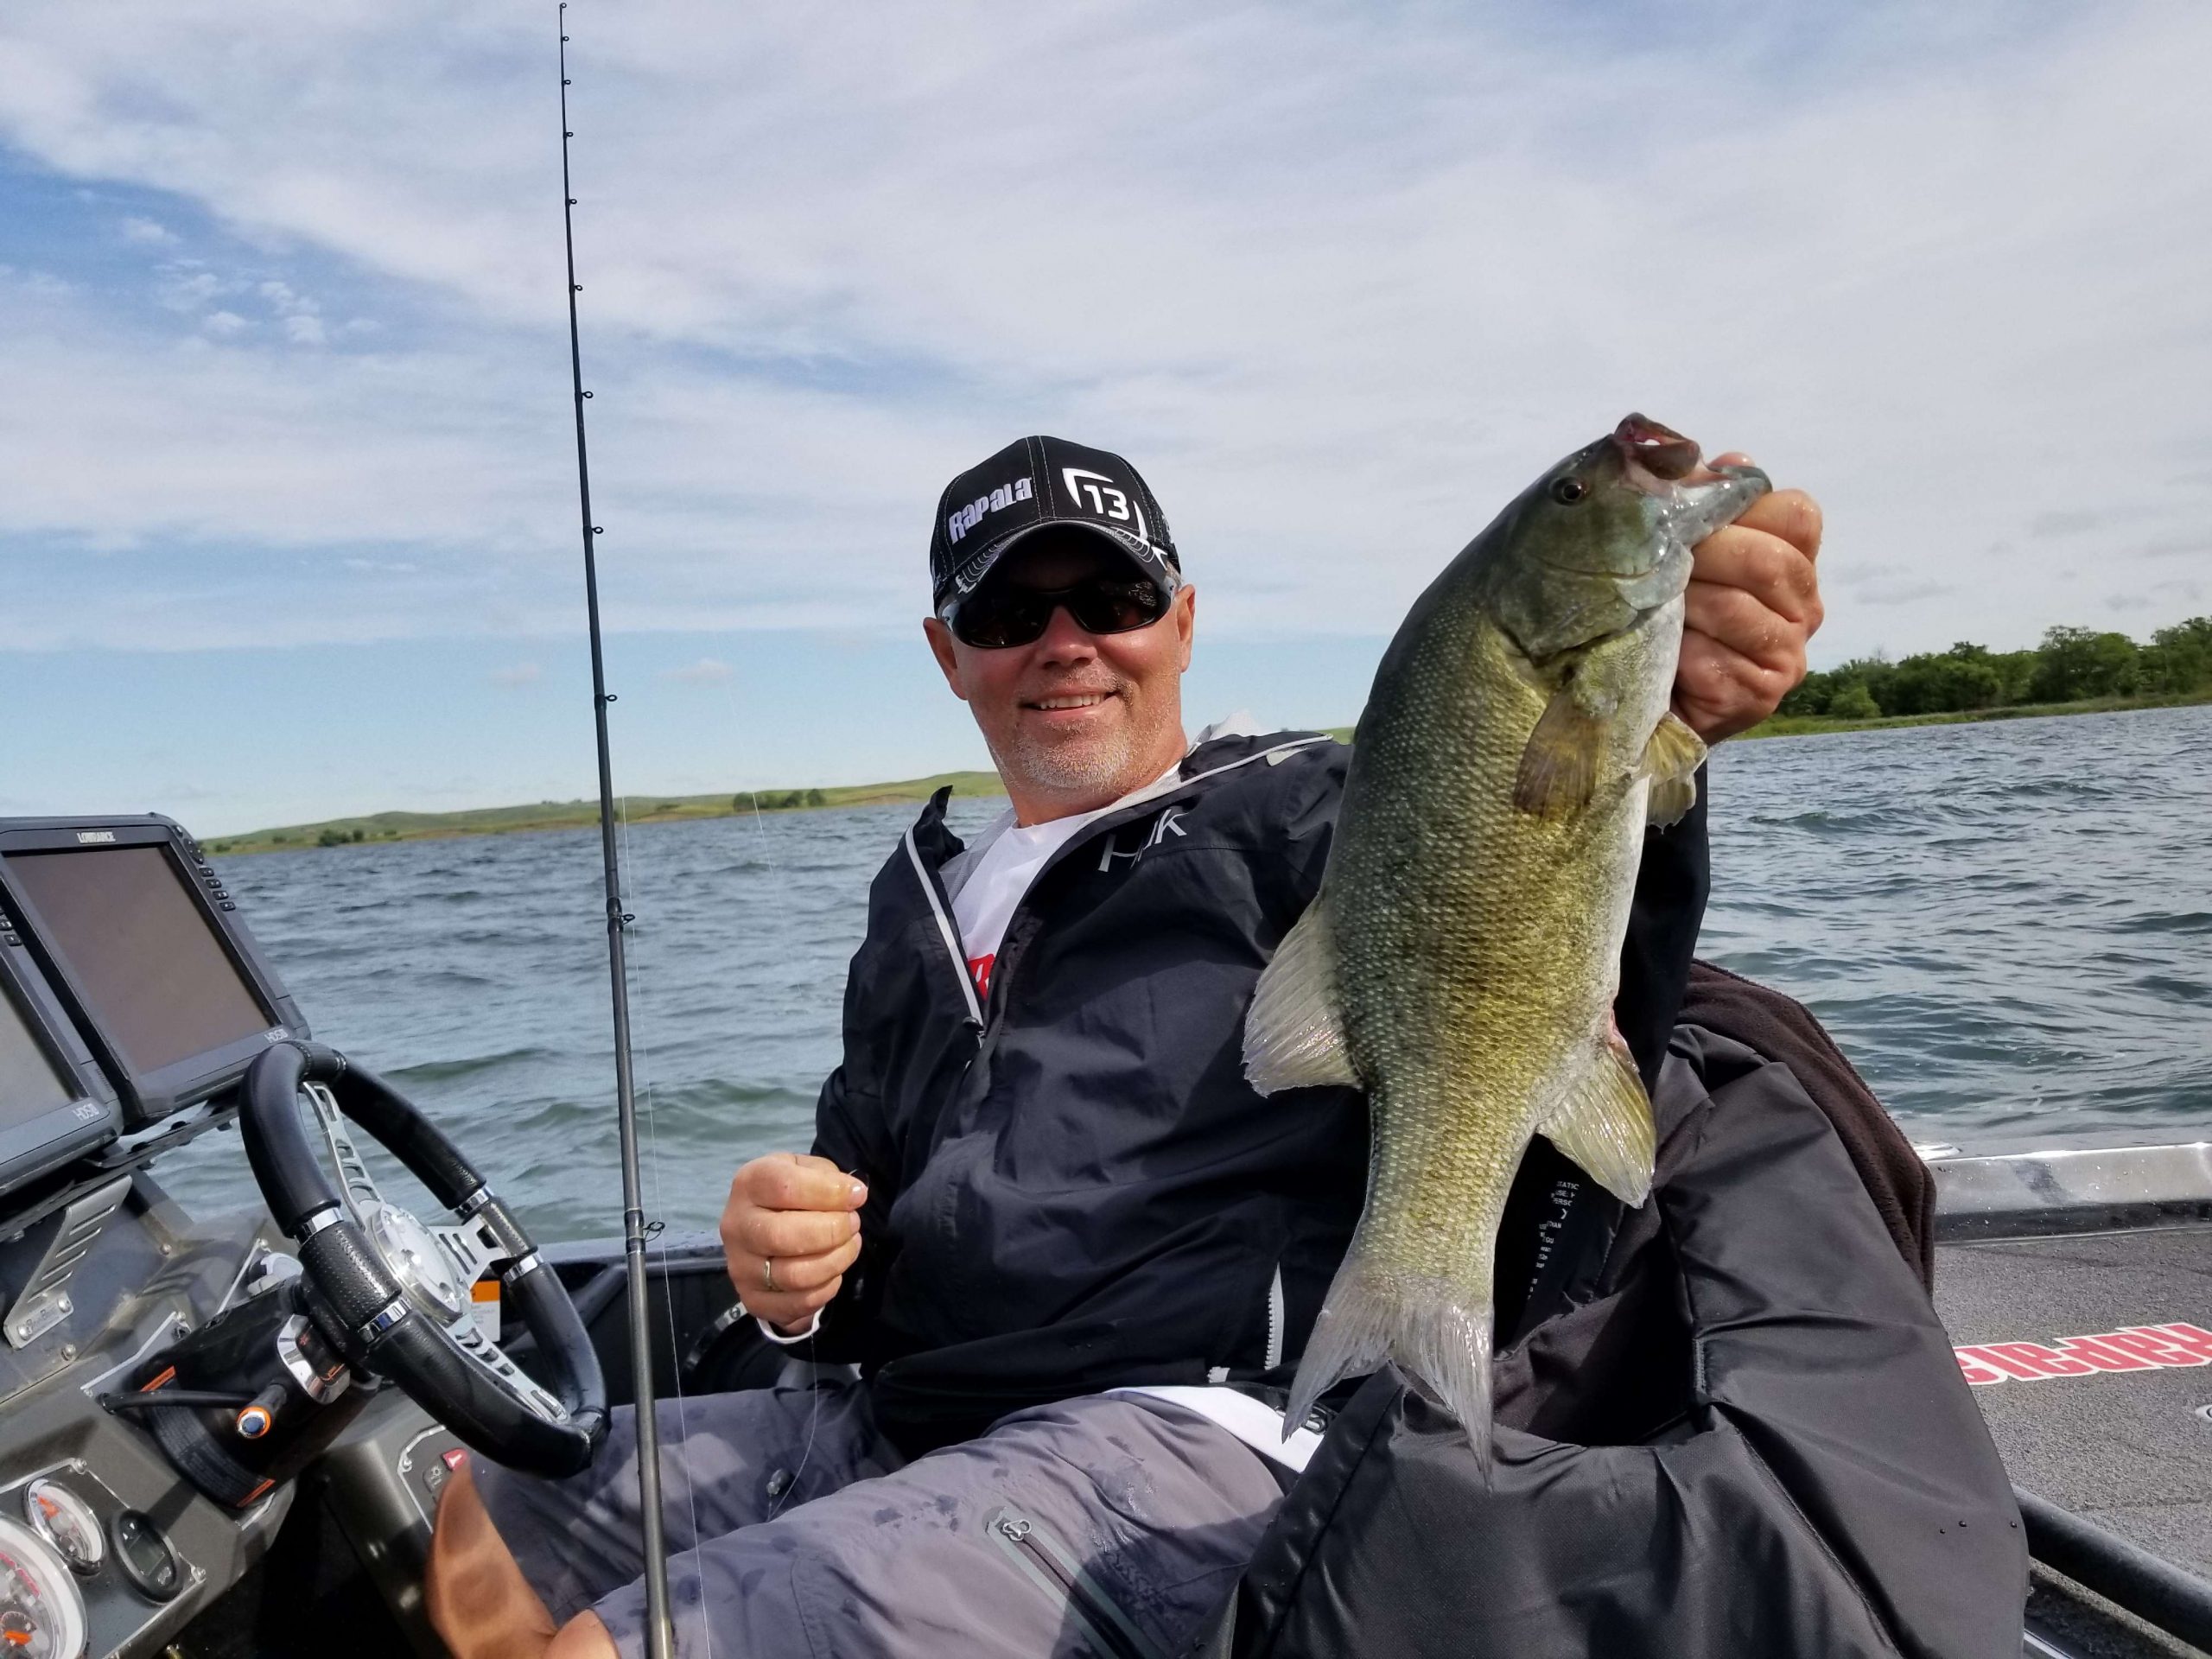 Dave Lefebre Bassmaster elite series Day 2 0n Lake Oahe boat flips 3.5 lbs making that this number 2.